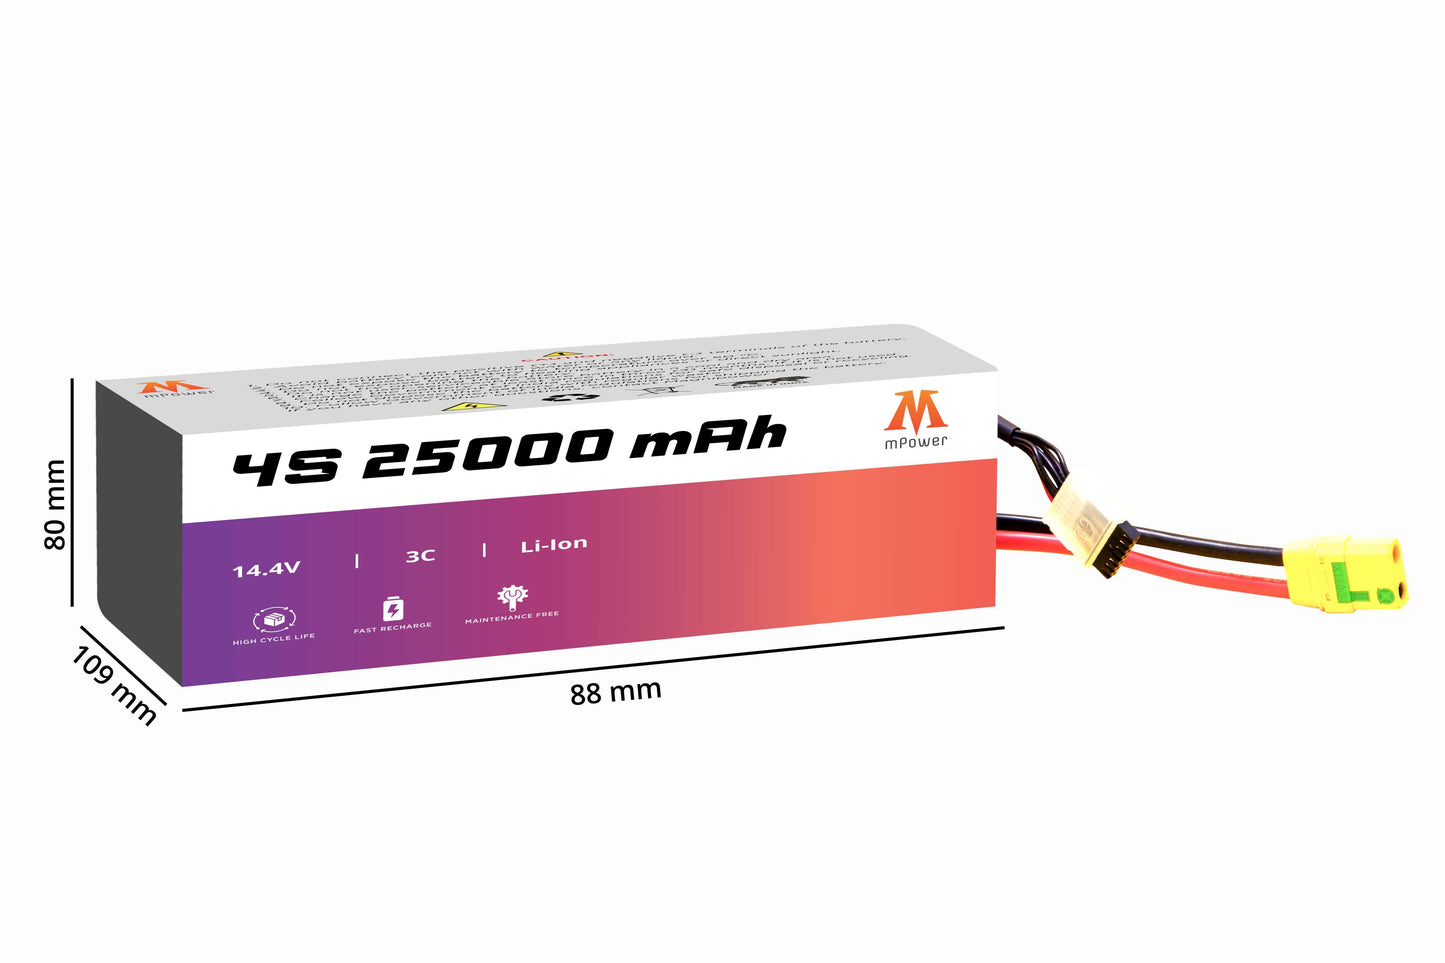 mPower 4S 25000mAh Lithium-Ion Battery for Surveillance Drones